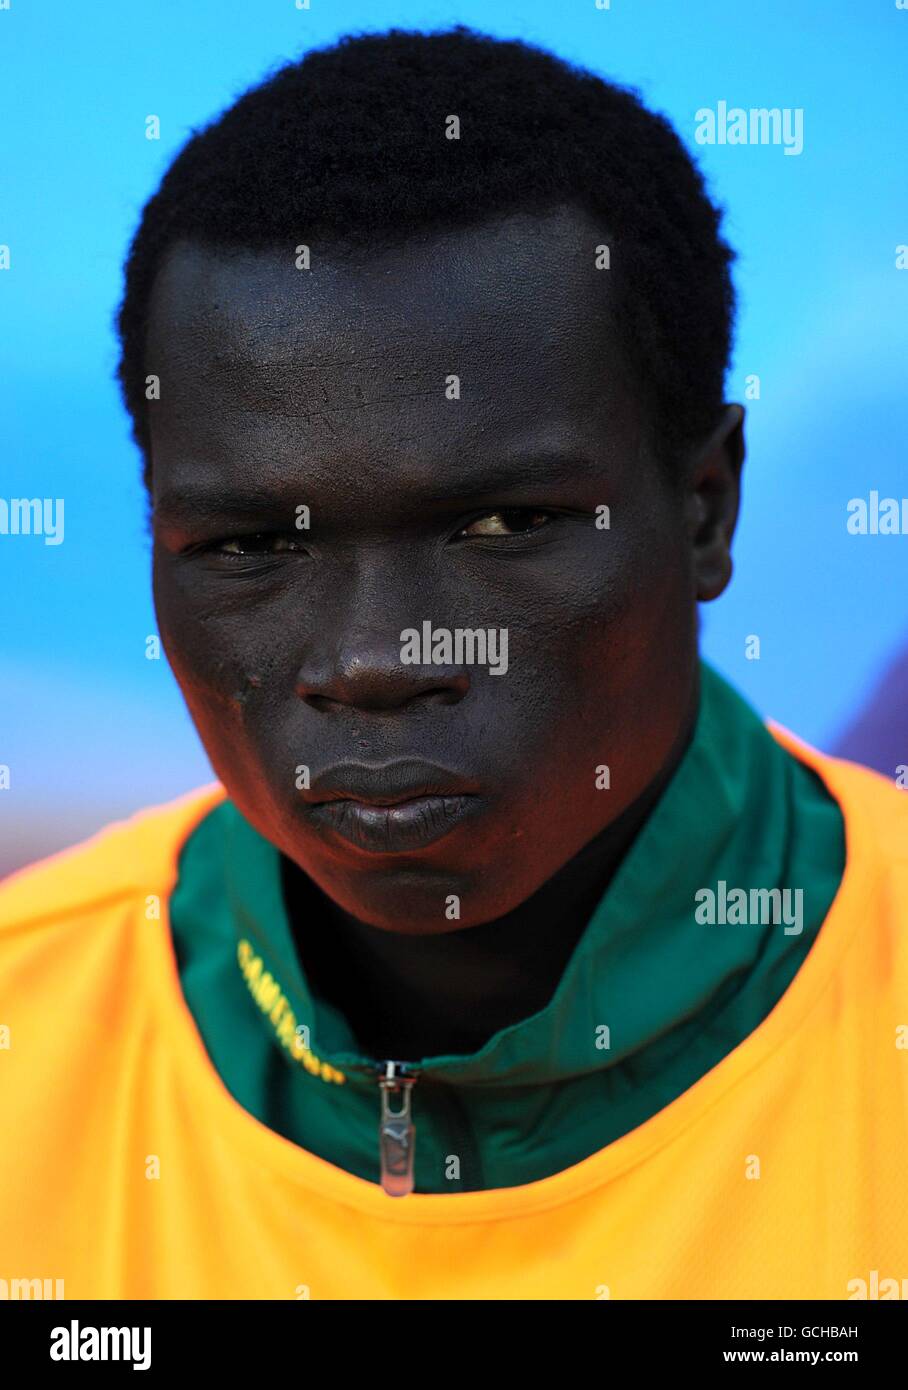 Soccer - 2010 FIFA World Cup South Africa - Group E - Japan v Cameroon - Free State Stadium. Vincent Aboubakar, Cameroon Stock Photo